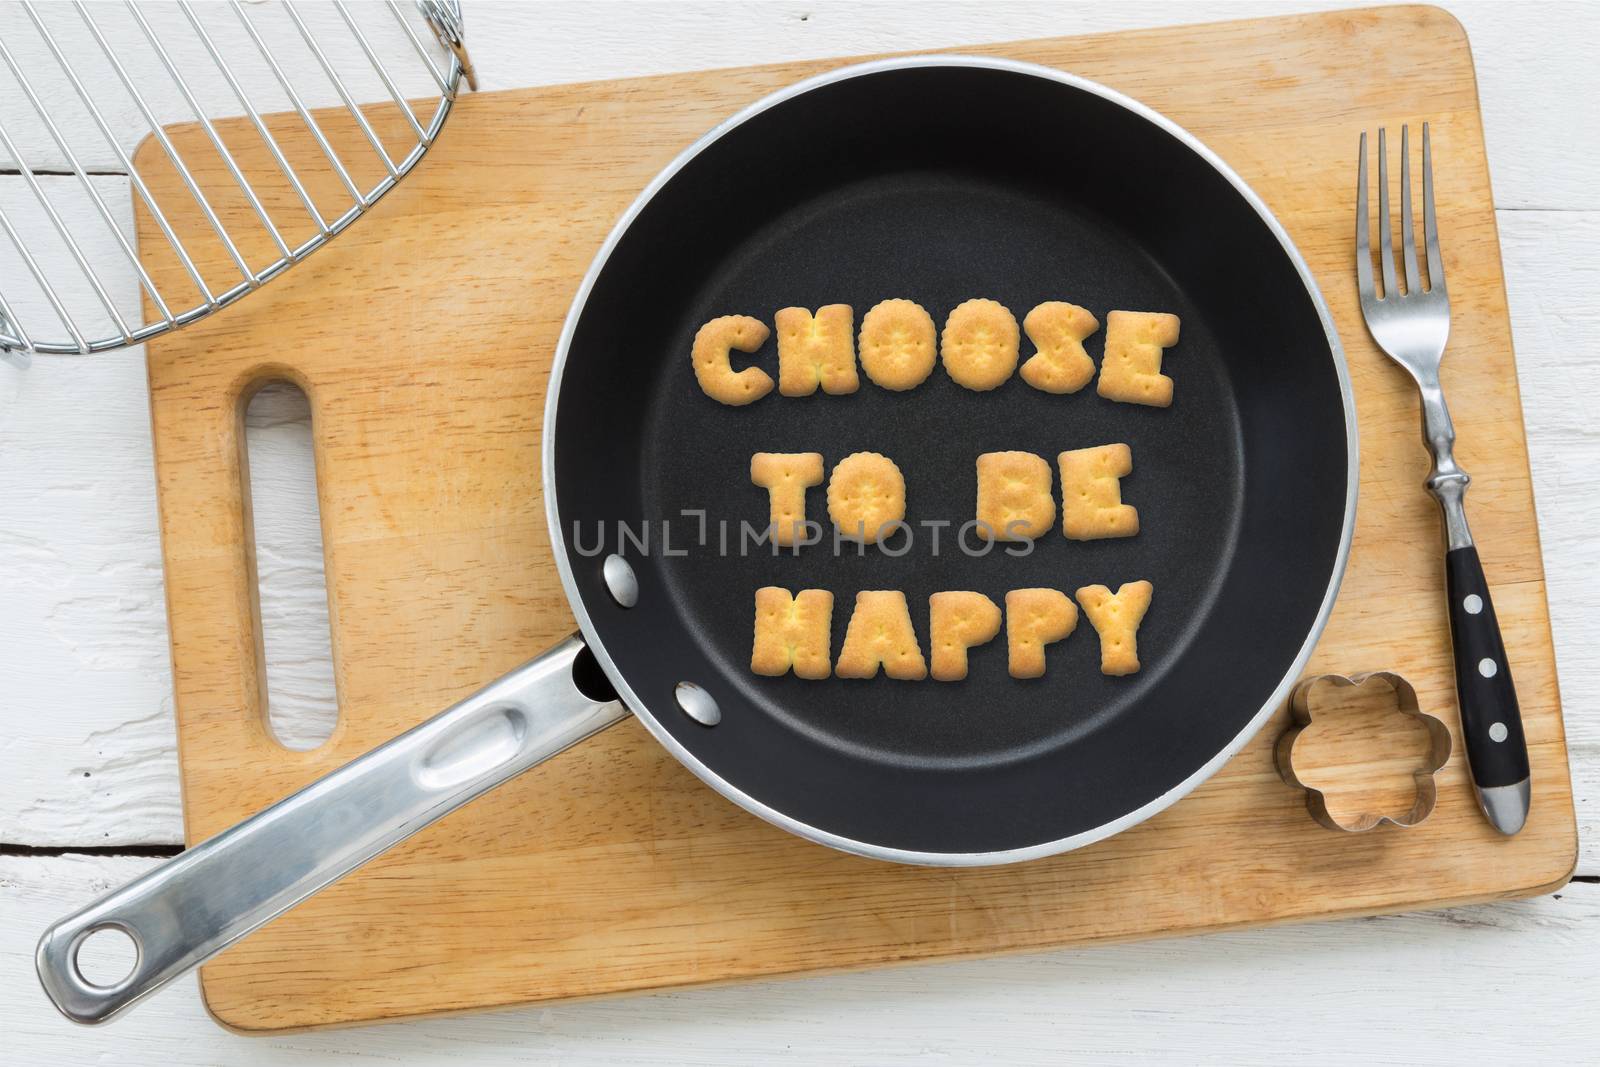 Alphabet biscuits quote CHOOSE TO BE HAPPY kitchenware by vinnstock